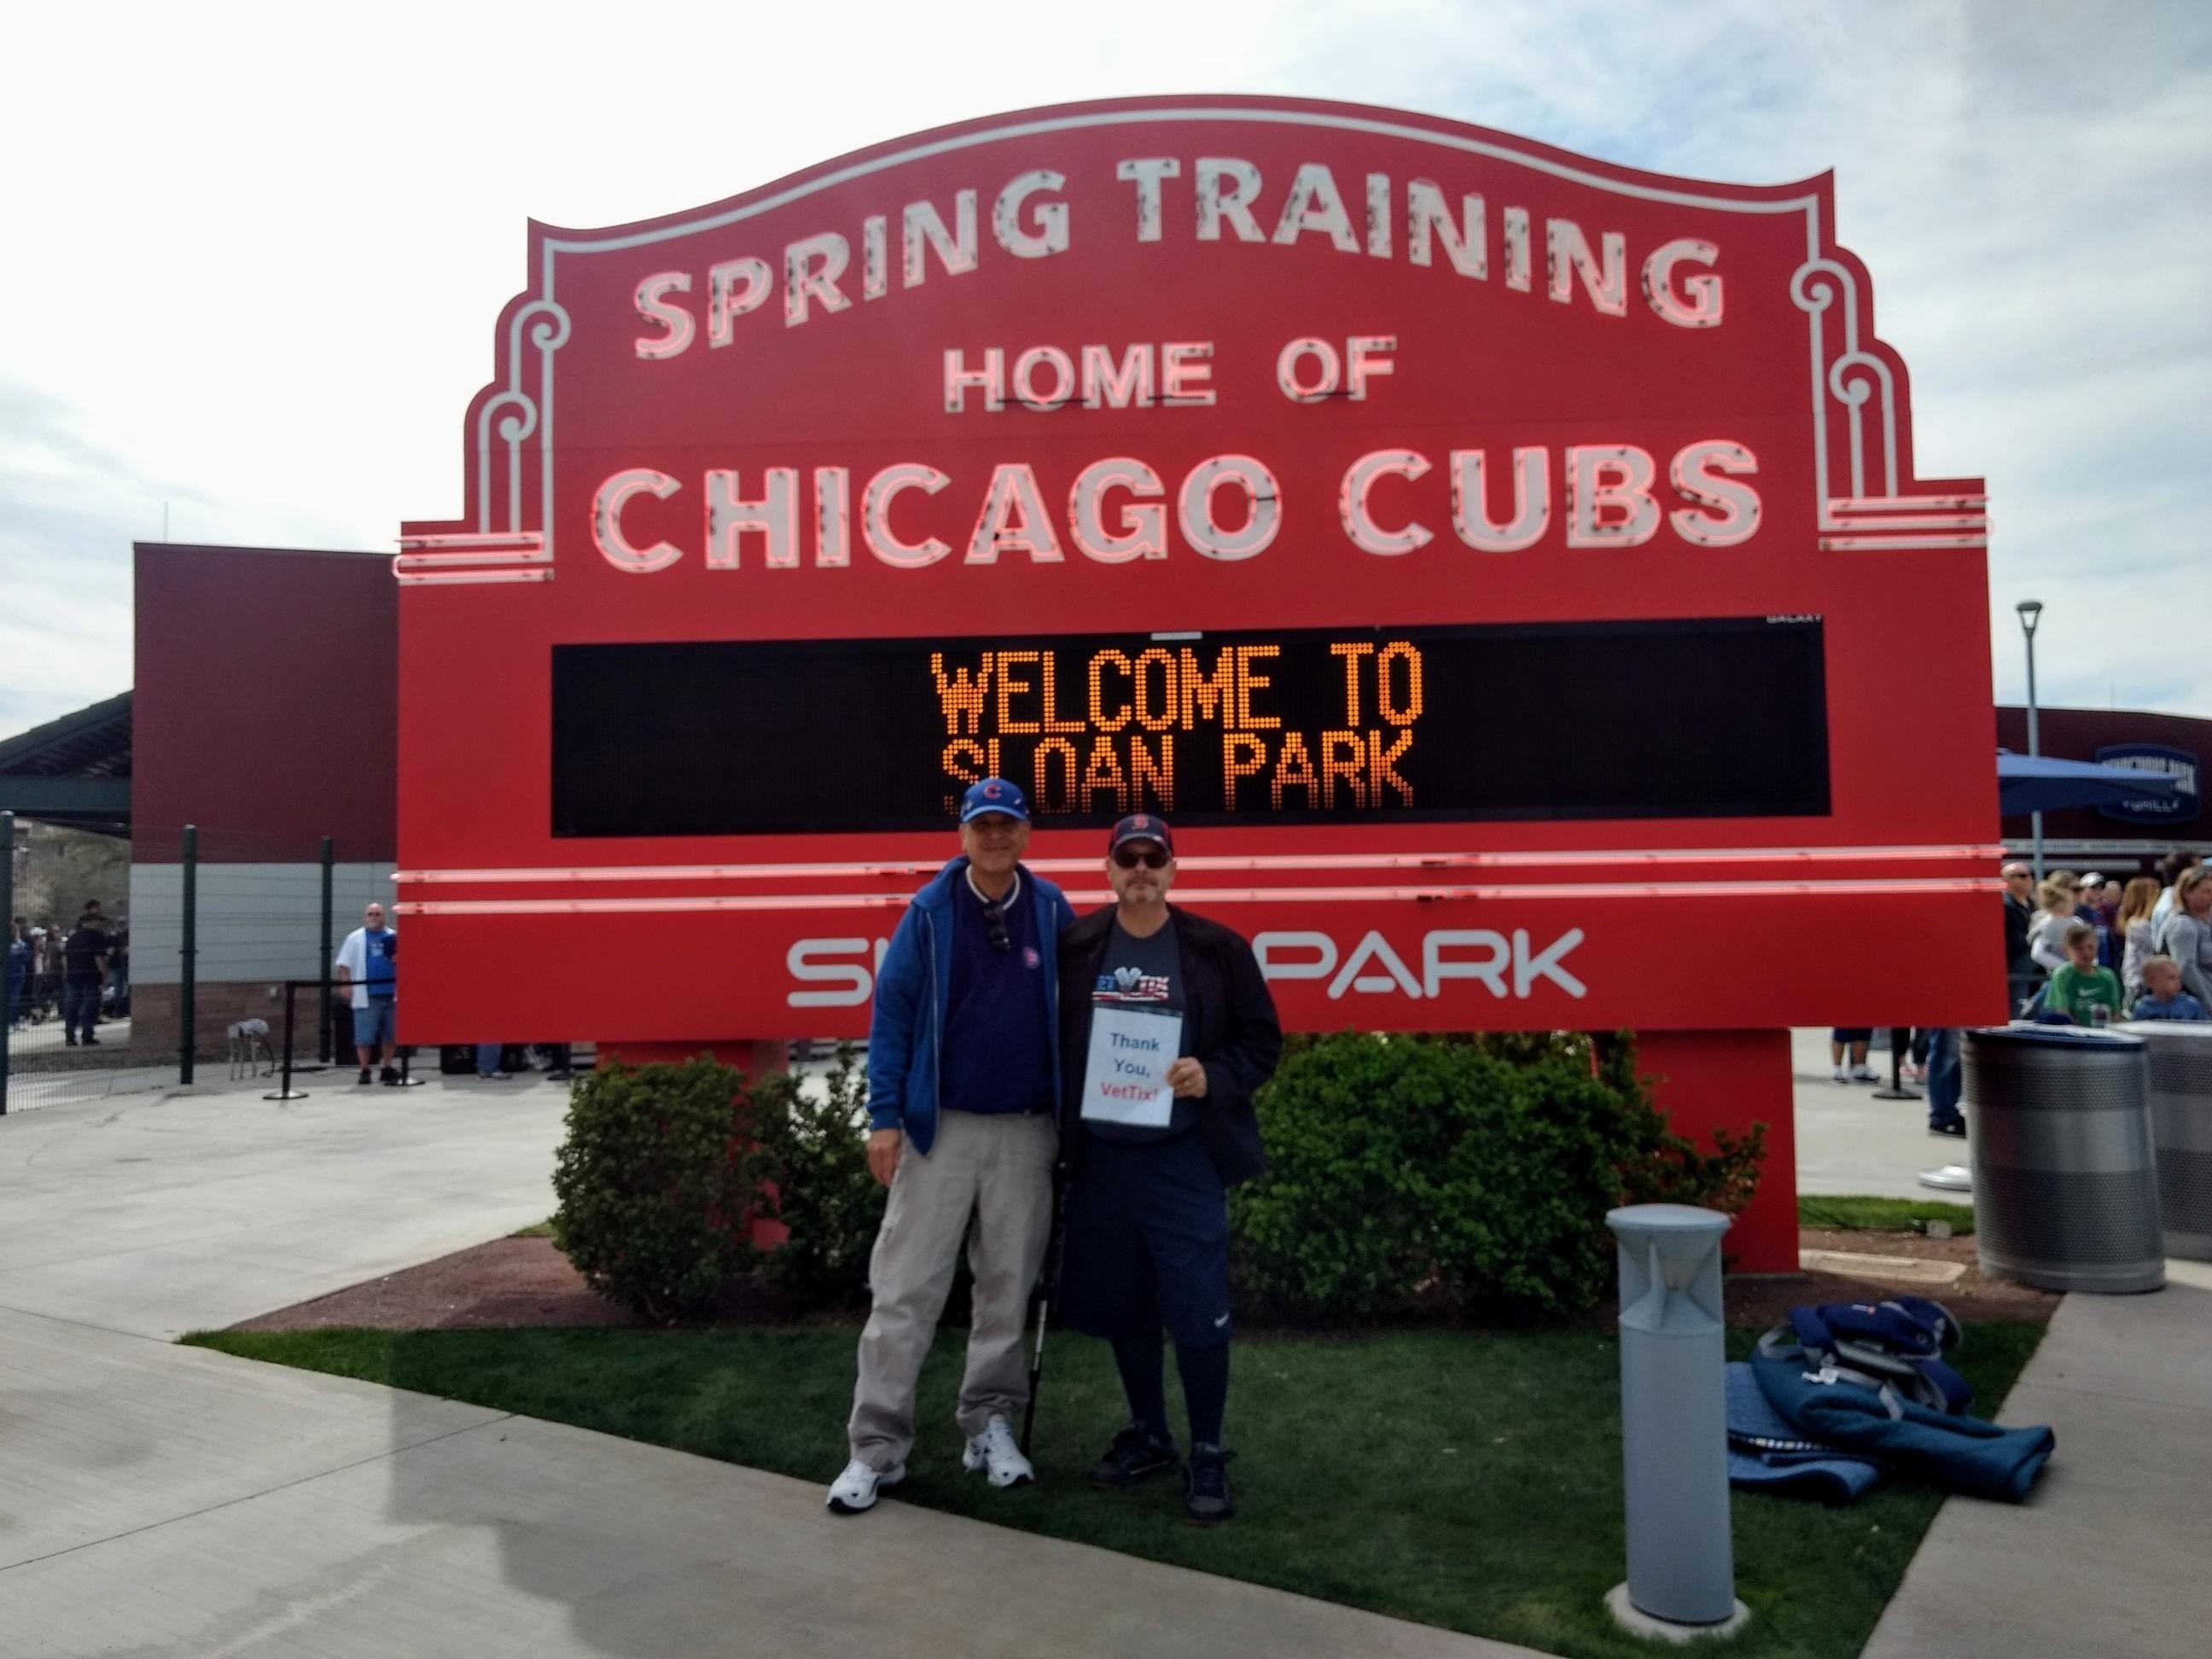 Chicago Cubs: A guide through Sloan Park and Spring Training 2019